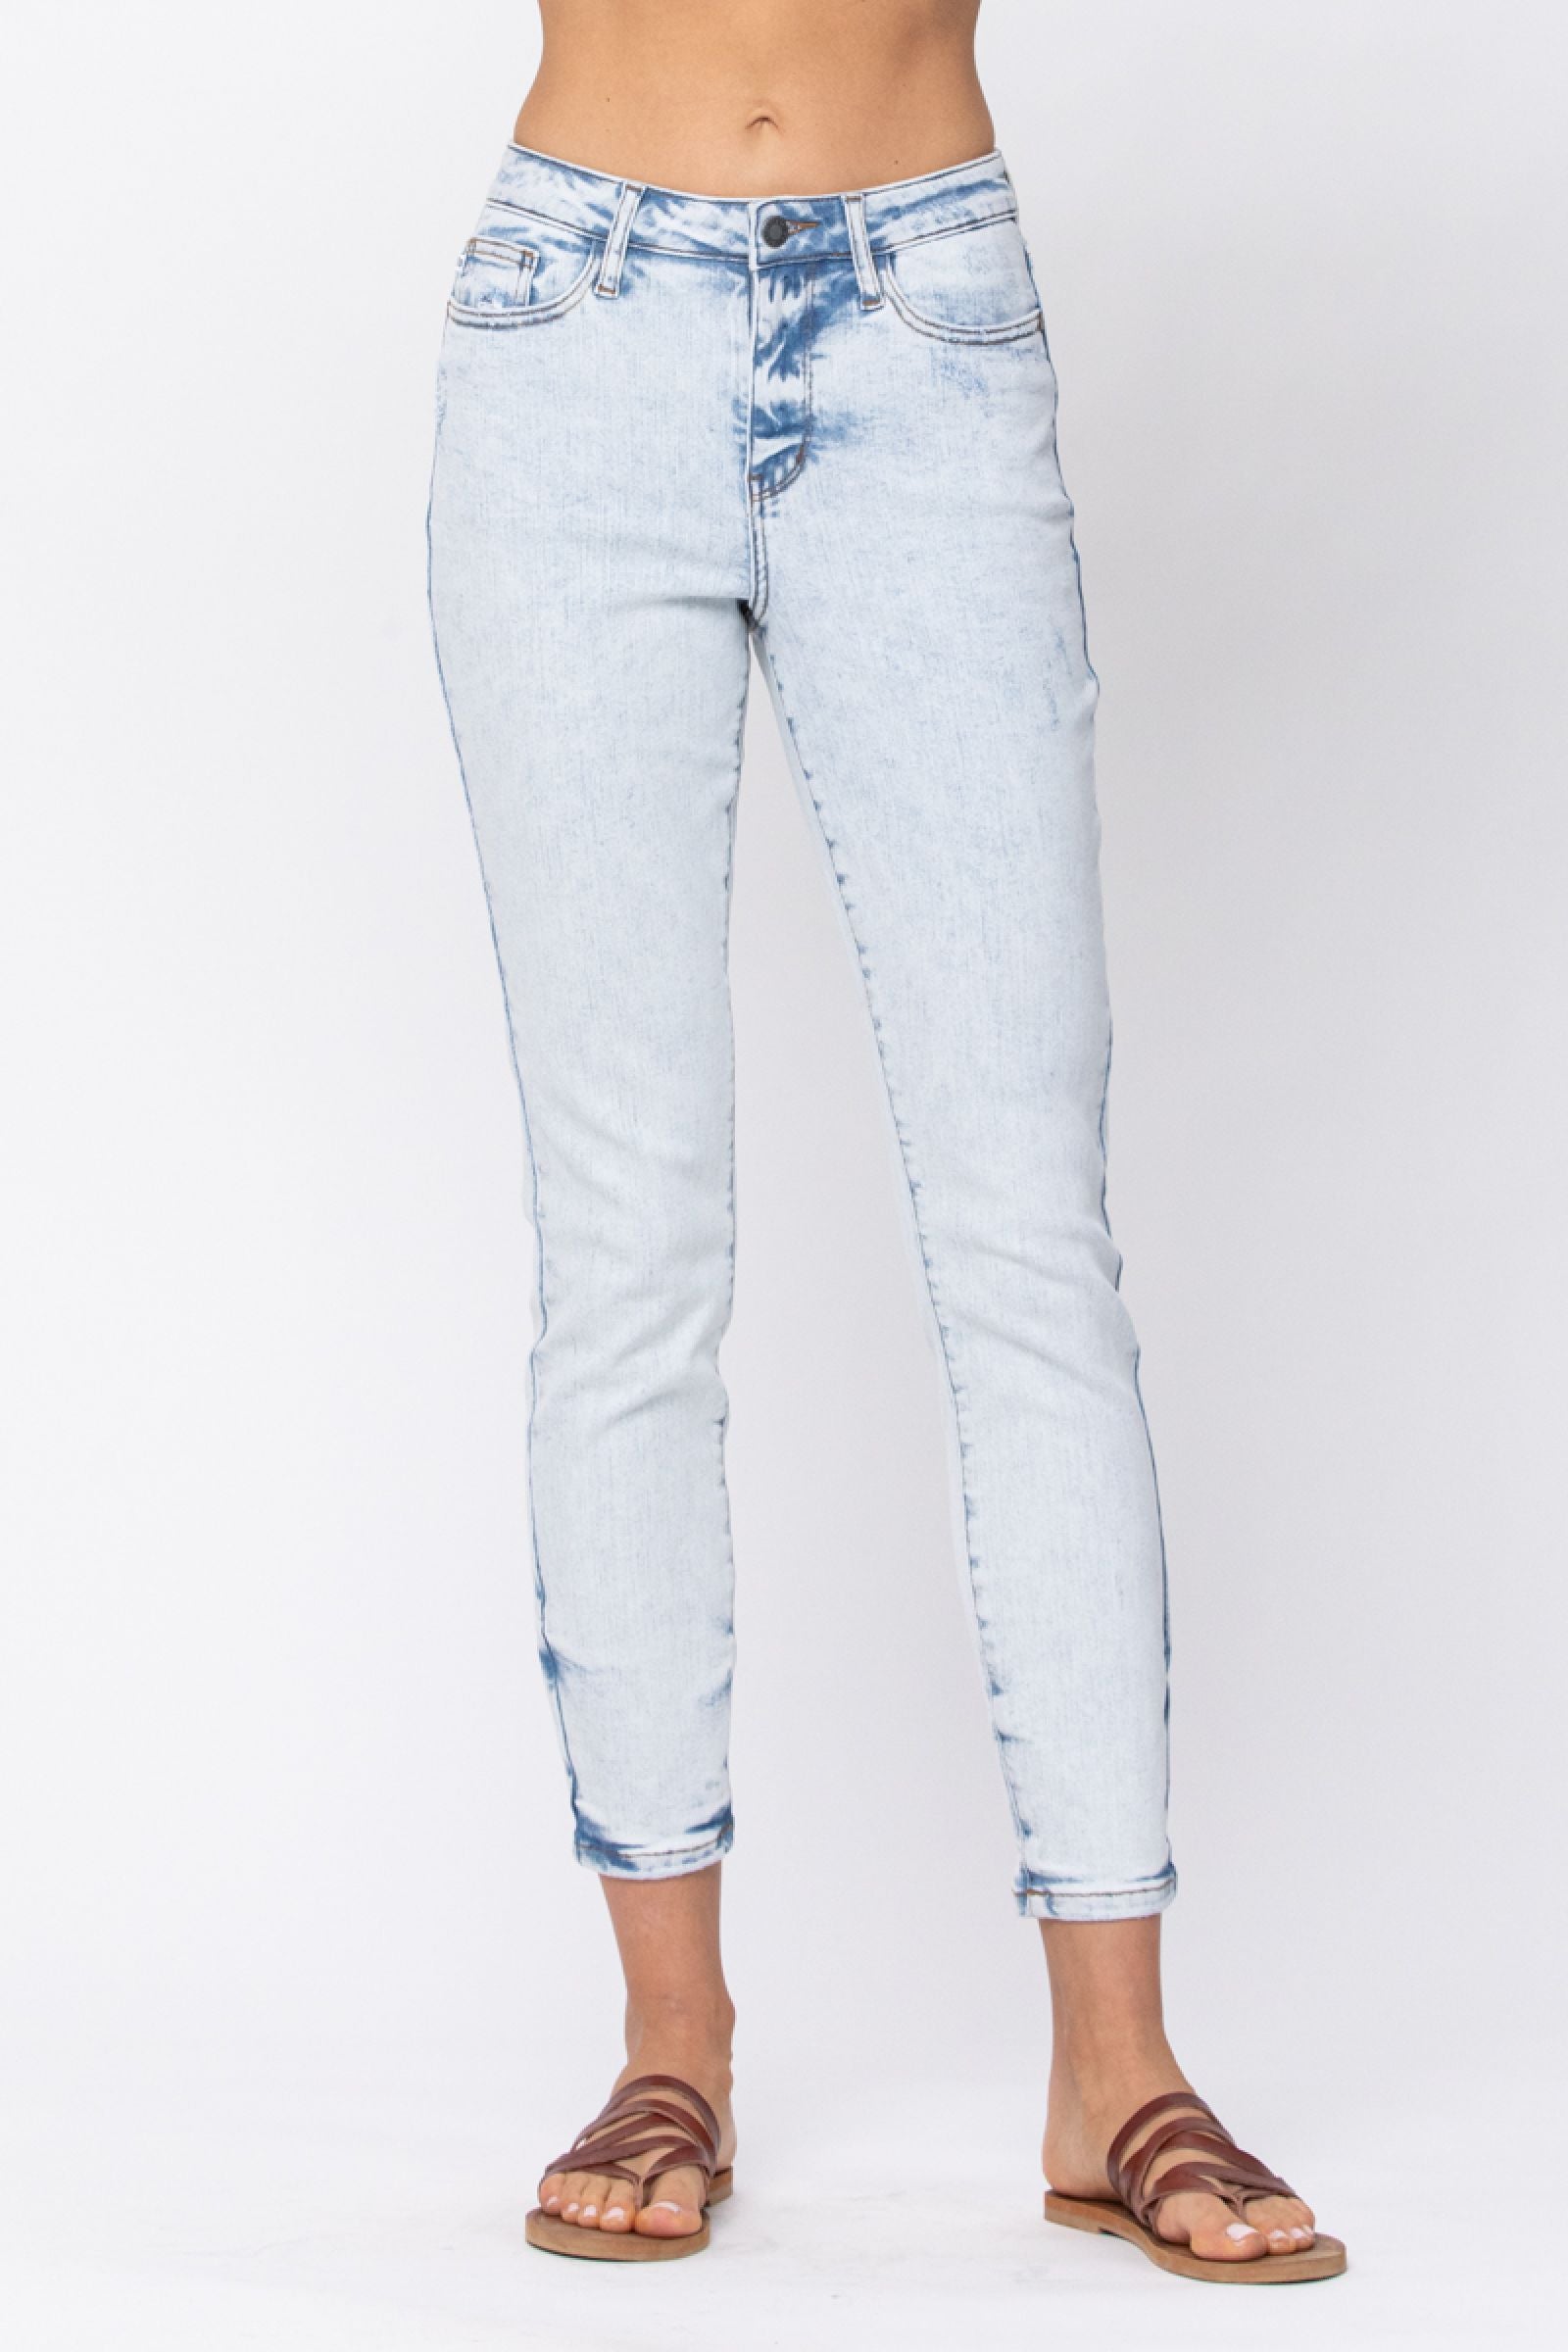 Being Human ice blue washed slim fit jeans - G3-MJE4487 | G3fashion.com